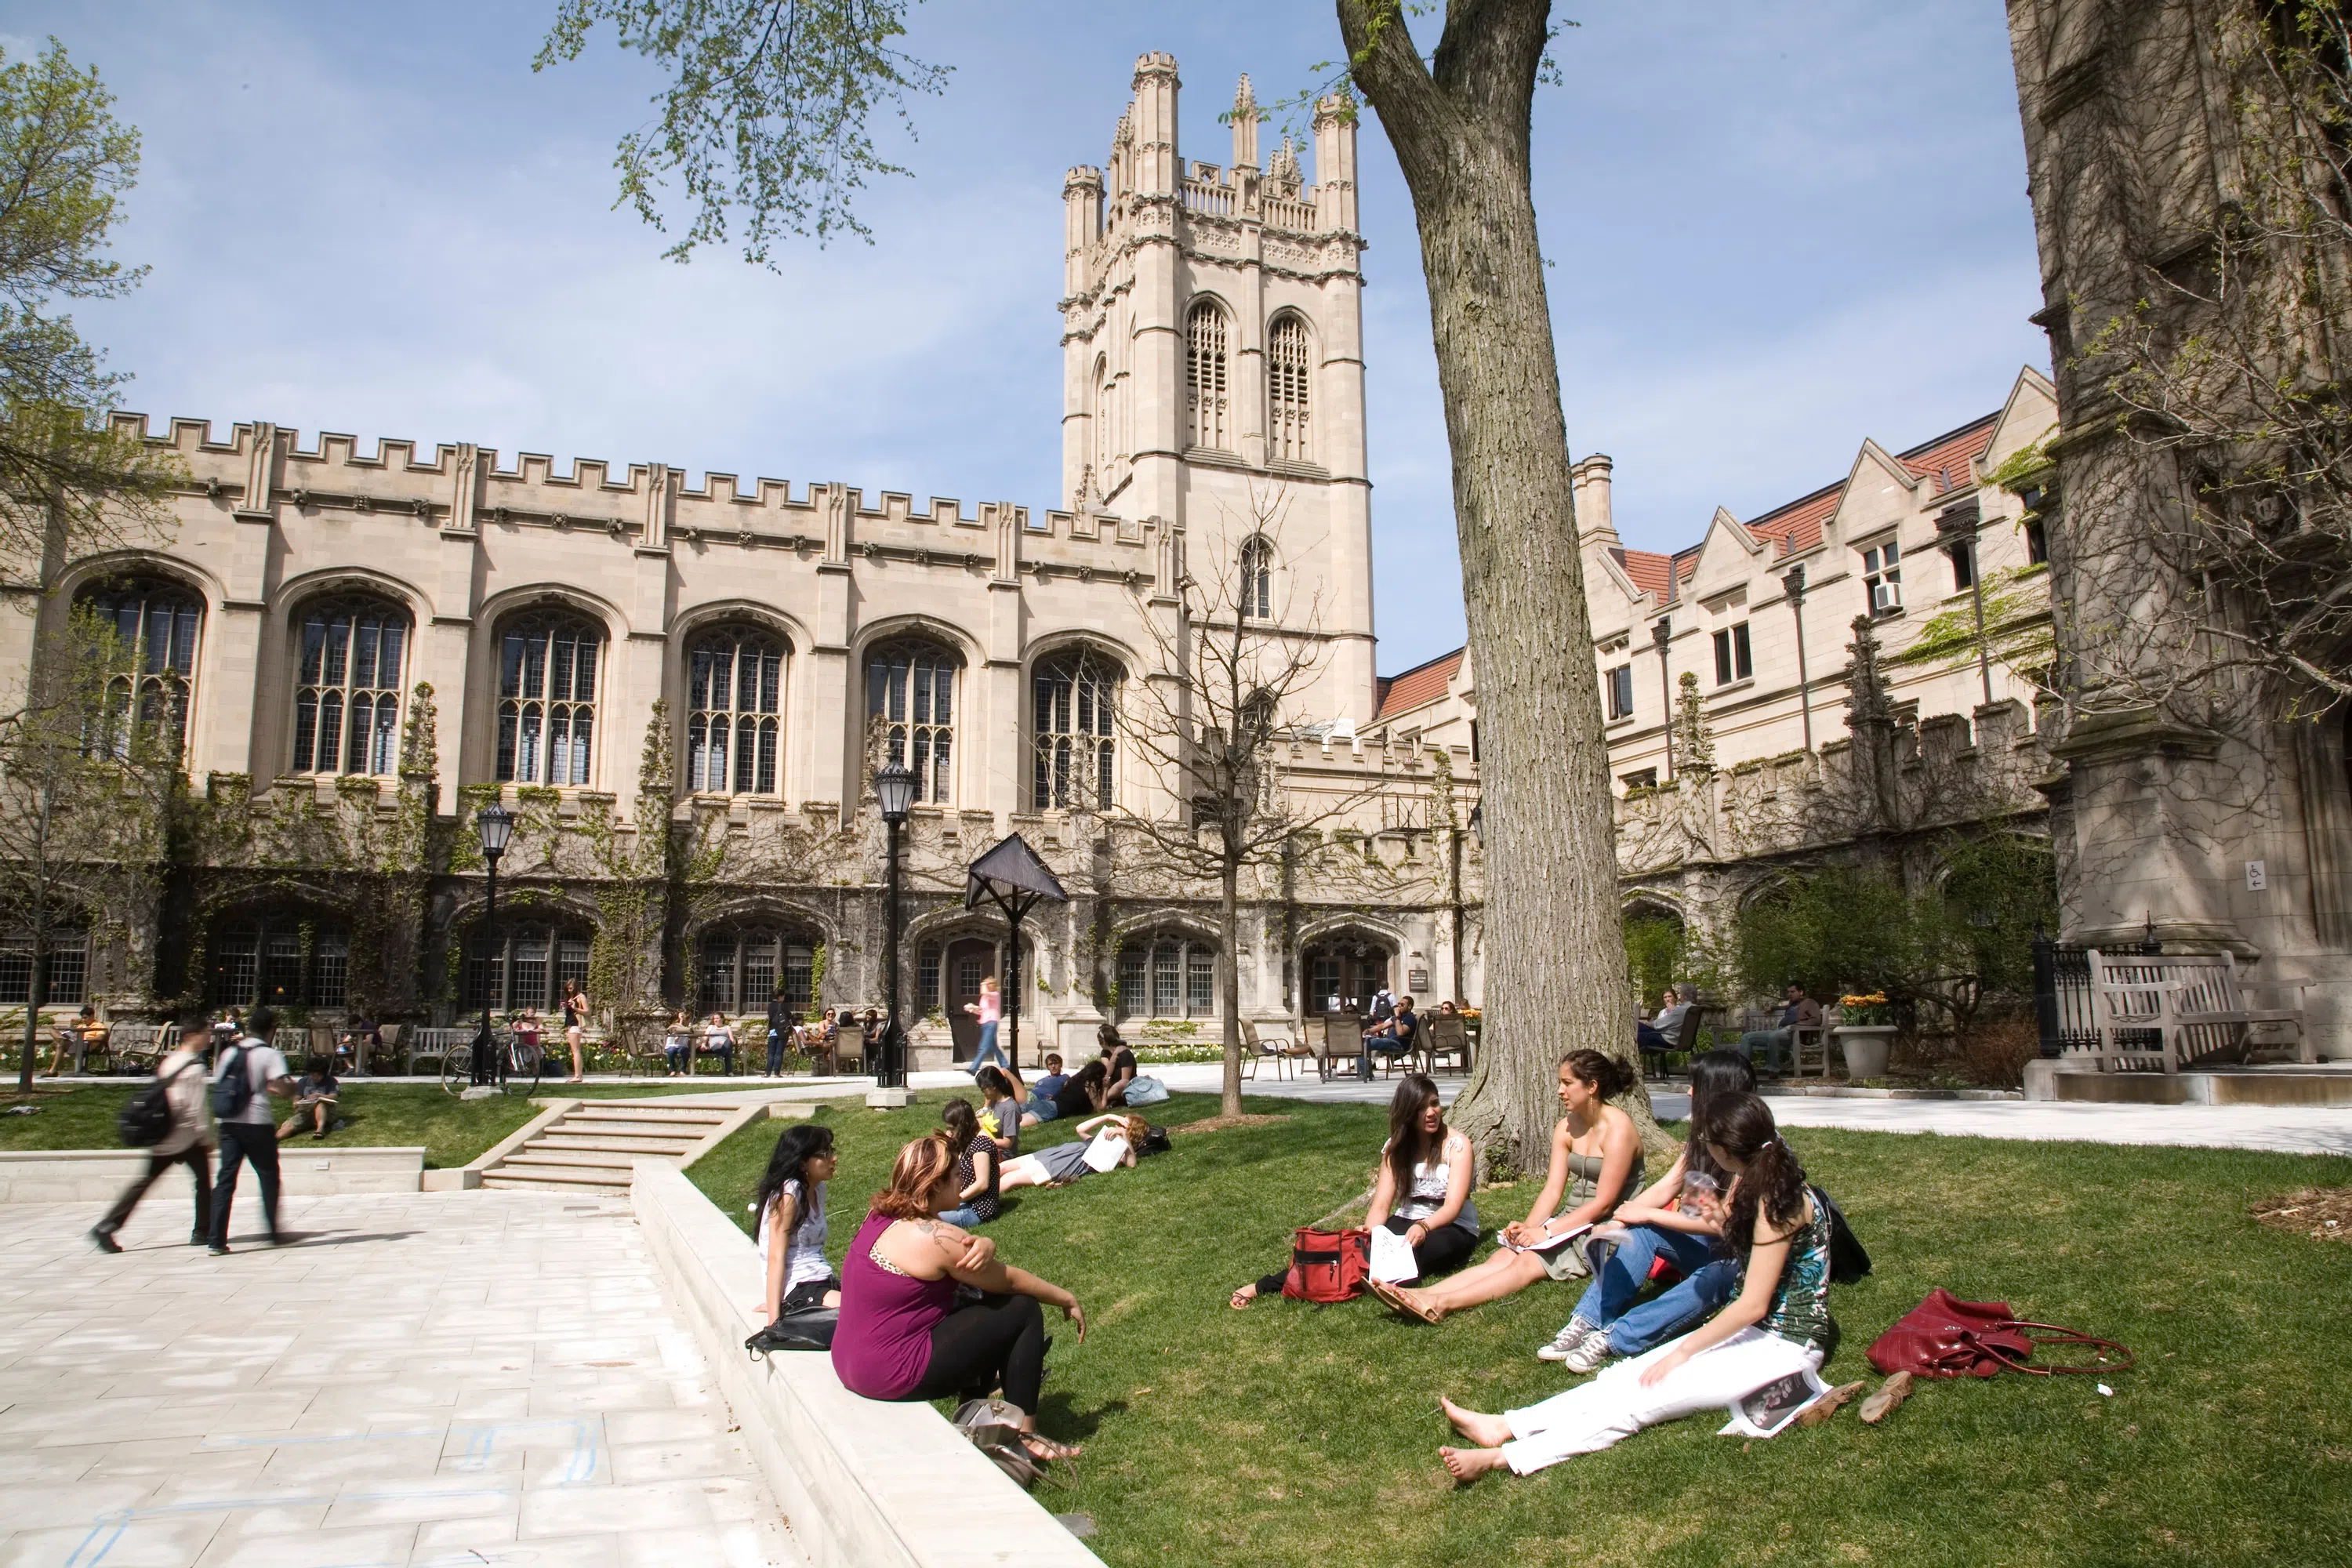 A group of students sit in a courtyard, with a Gothic-style building in the background